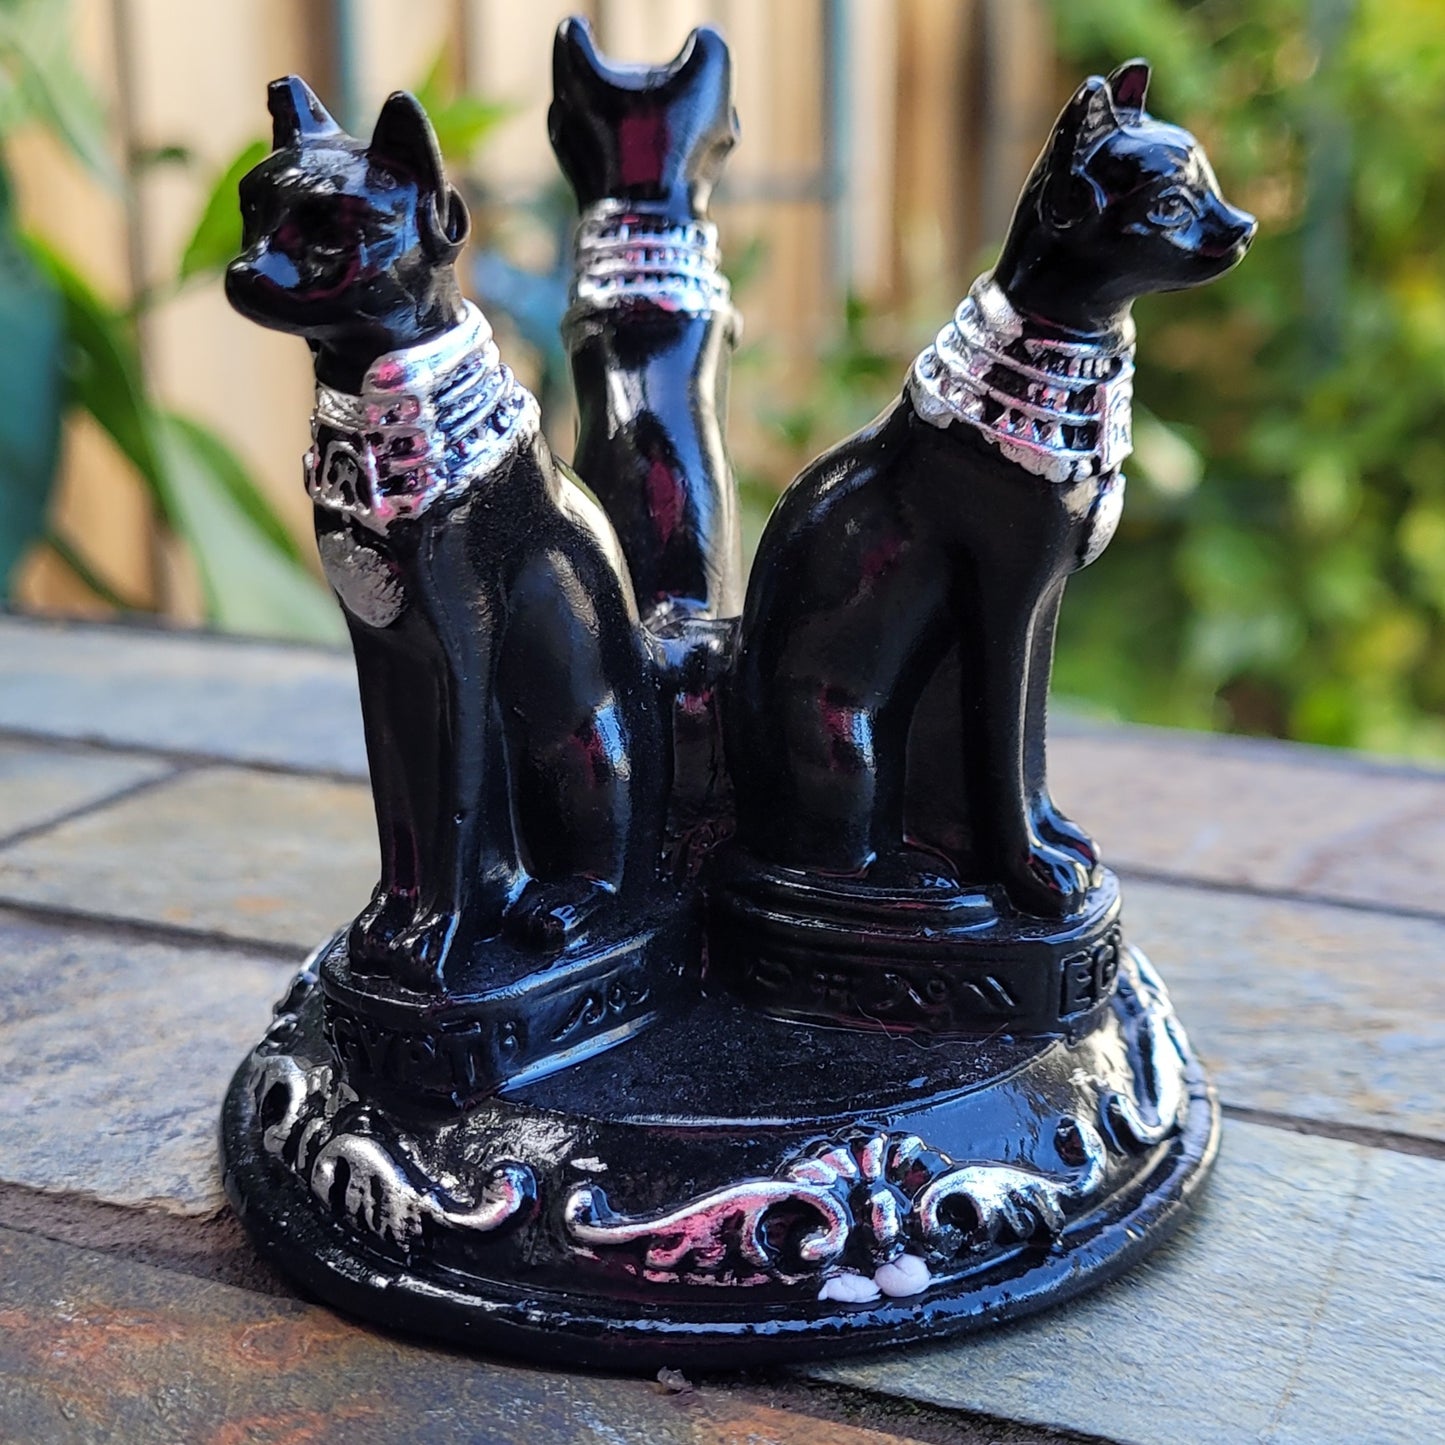 Black Egyptian Cat Sphere Display Stand for Crystal Balls or Eggs 1.5" to 4.5" (37mm to 113mm)